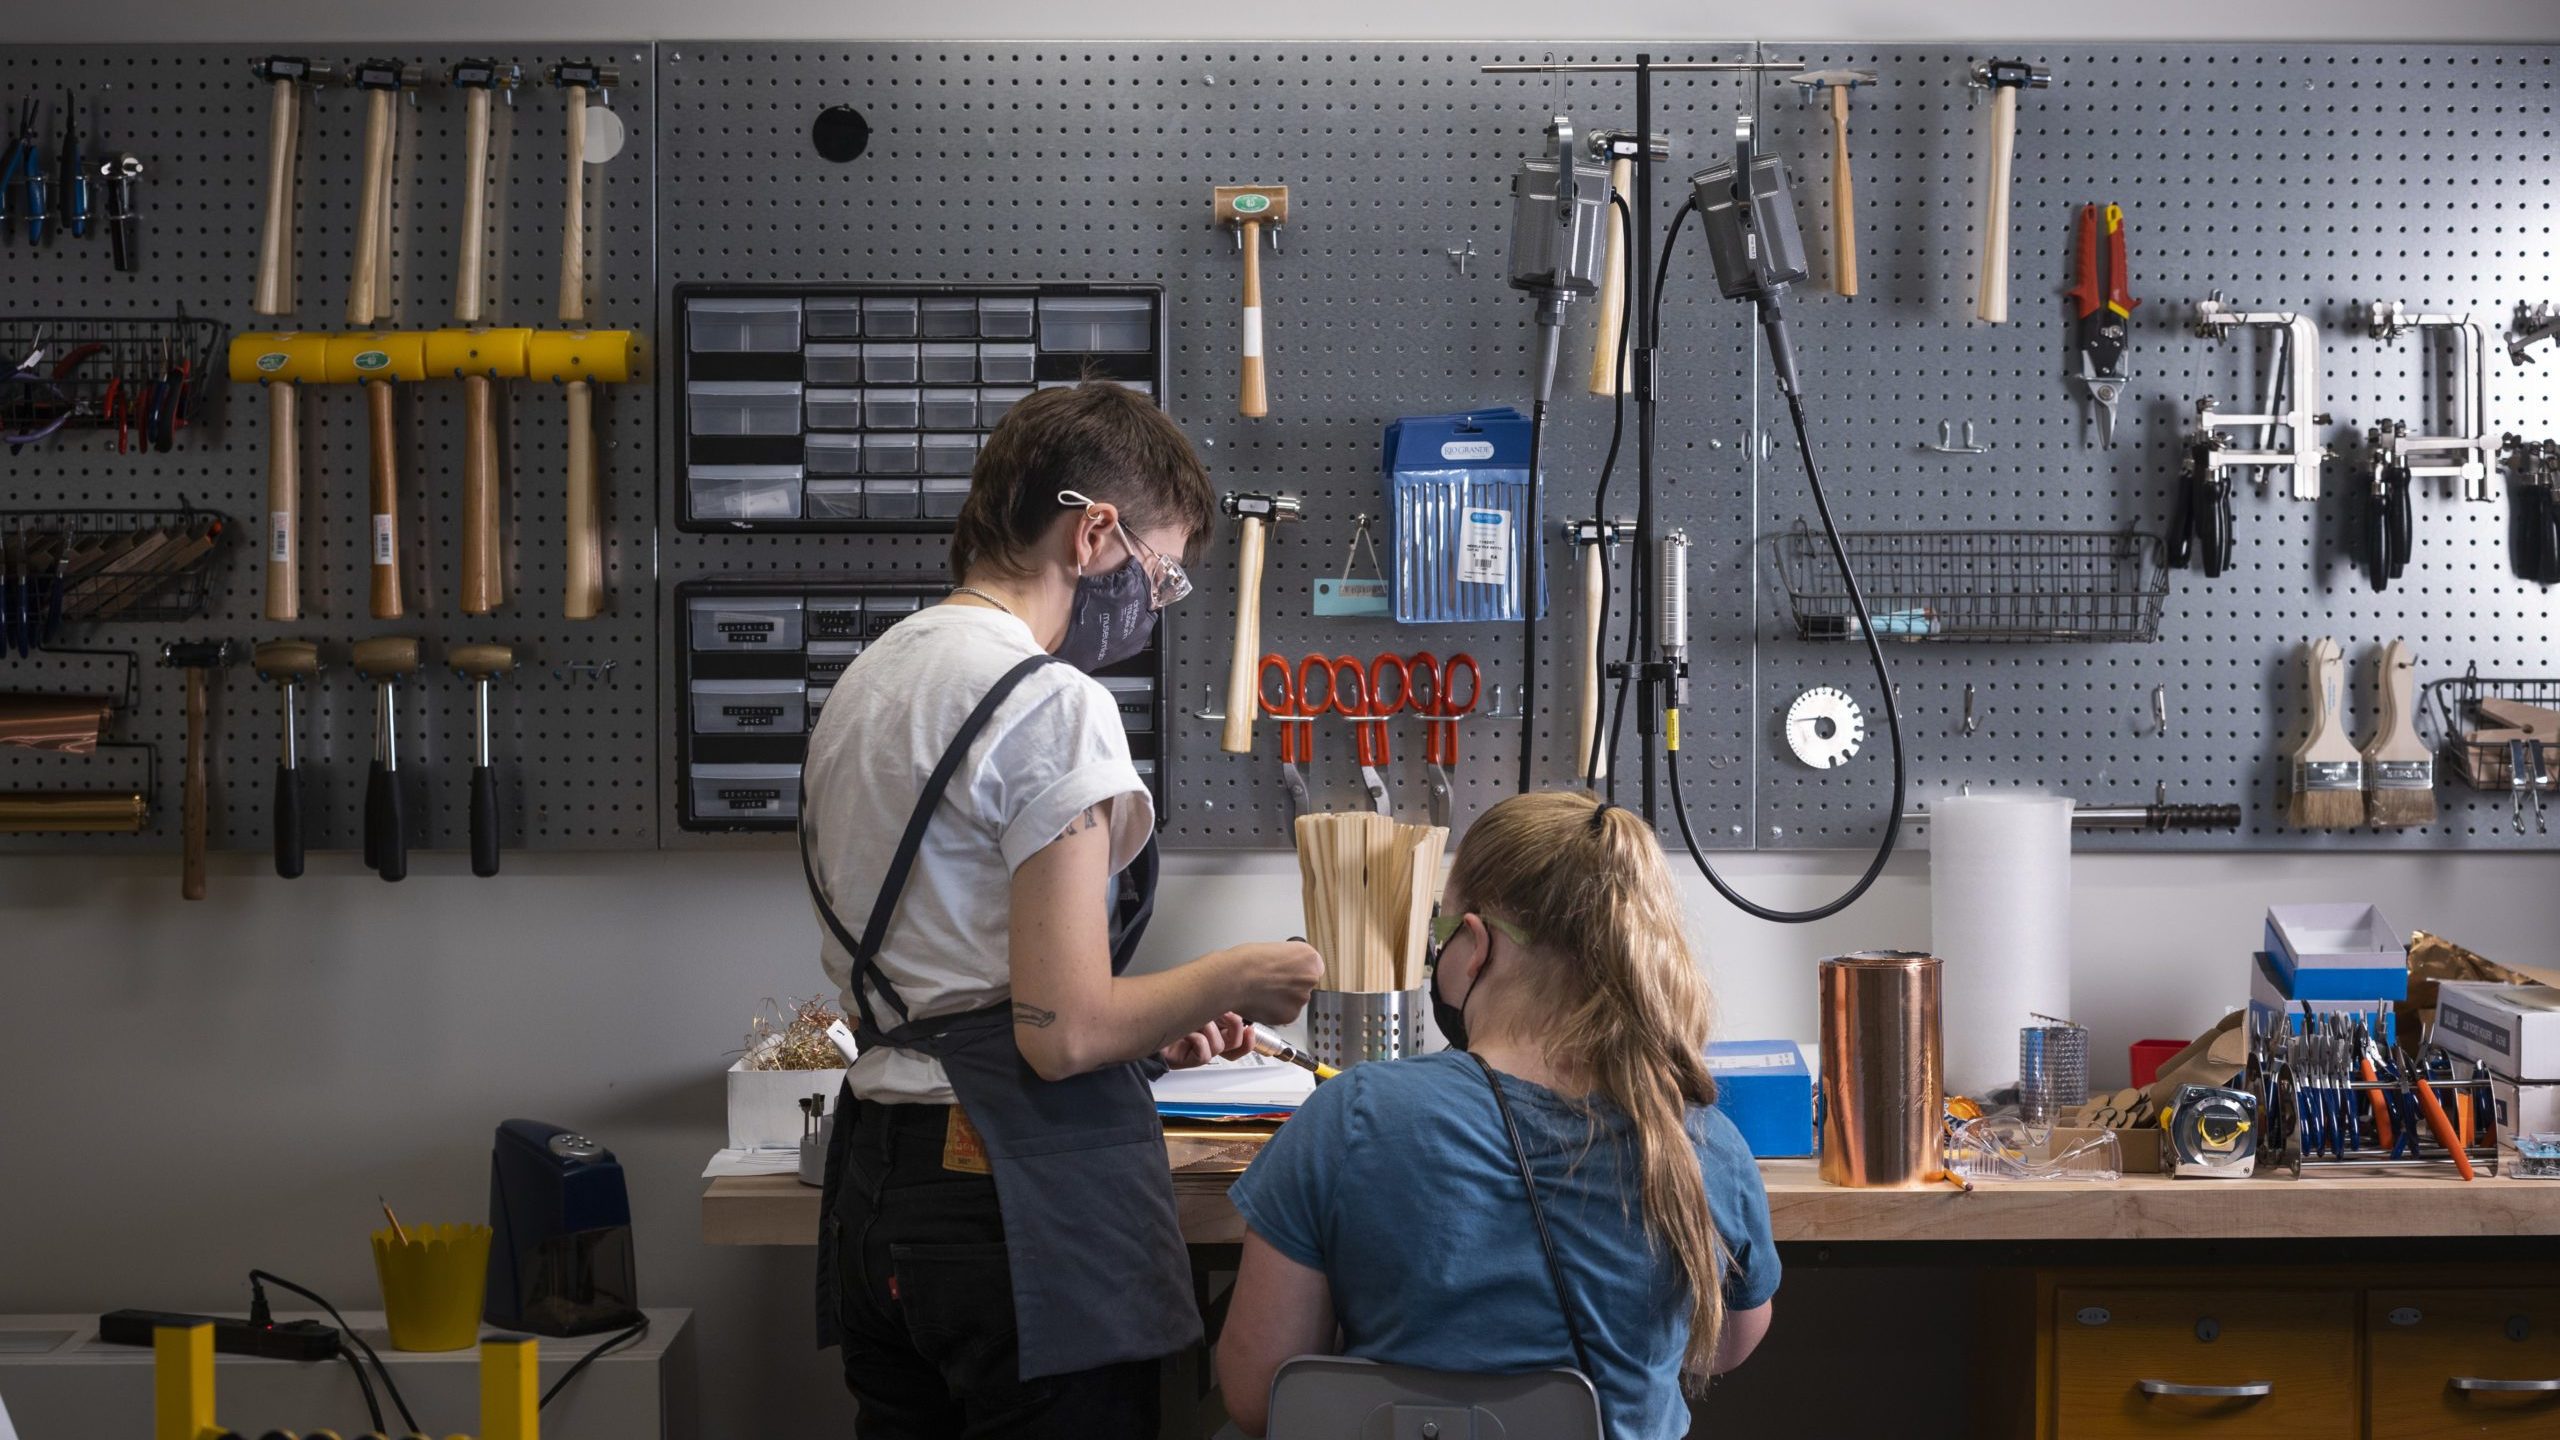 A photograph taken from behind of two people, an adult and a child. They are working together in front of a wall of metalworking tools.